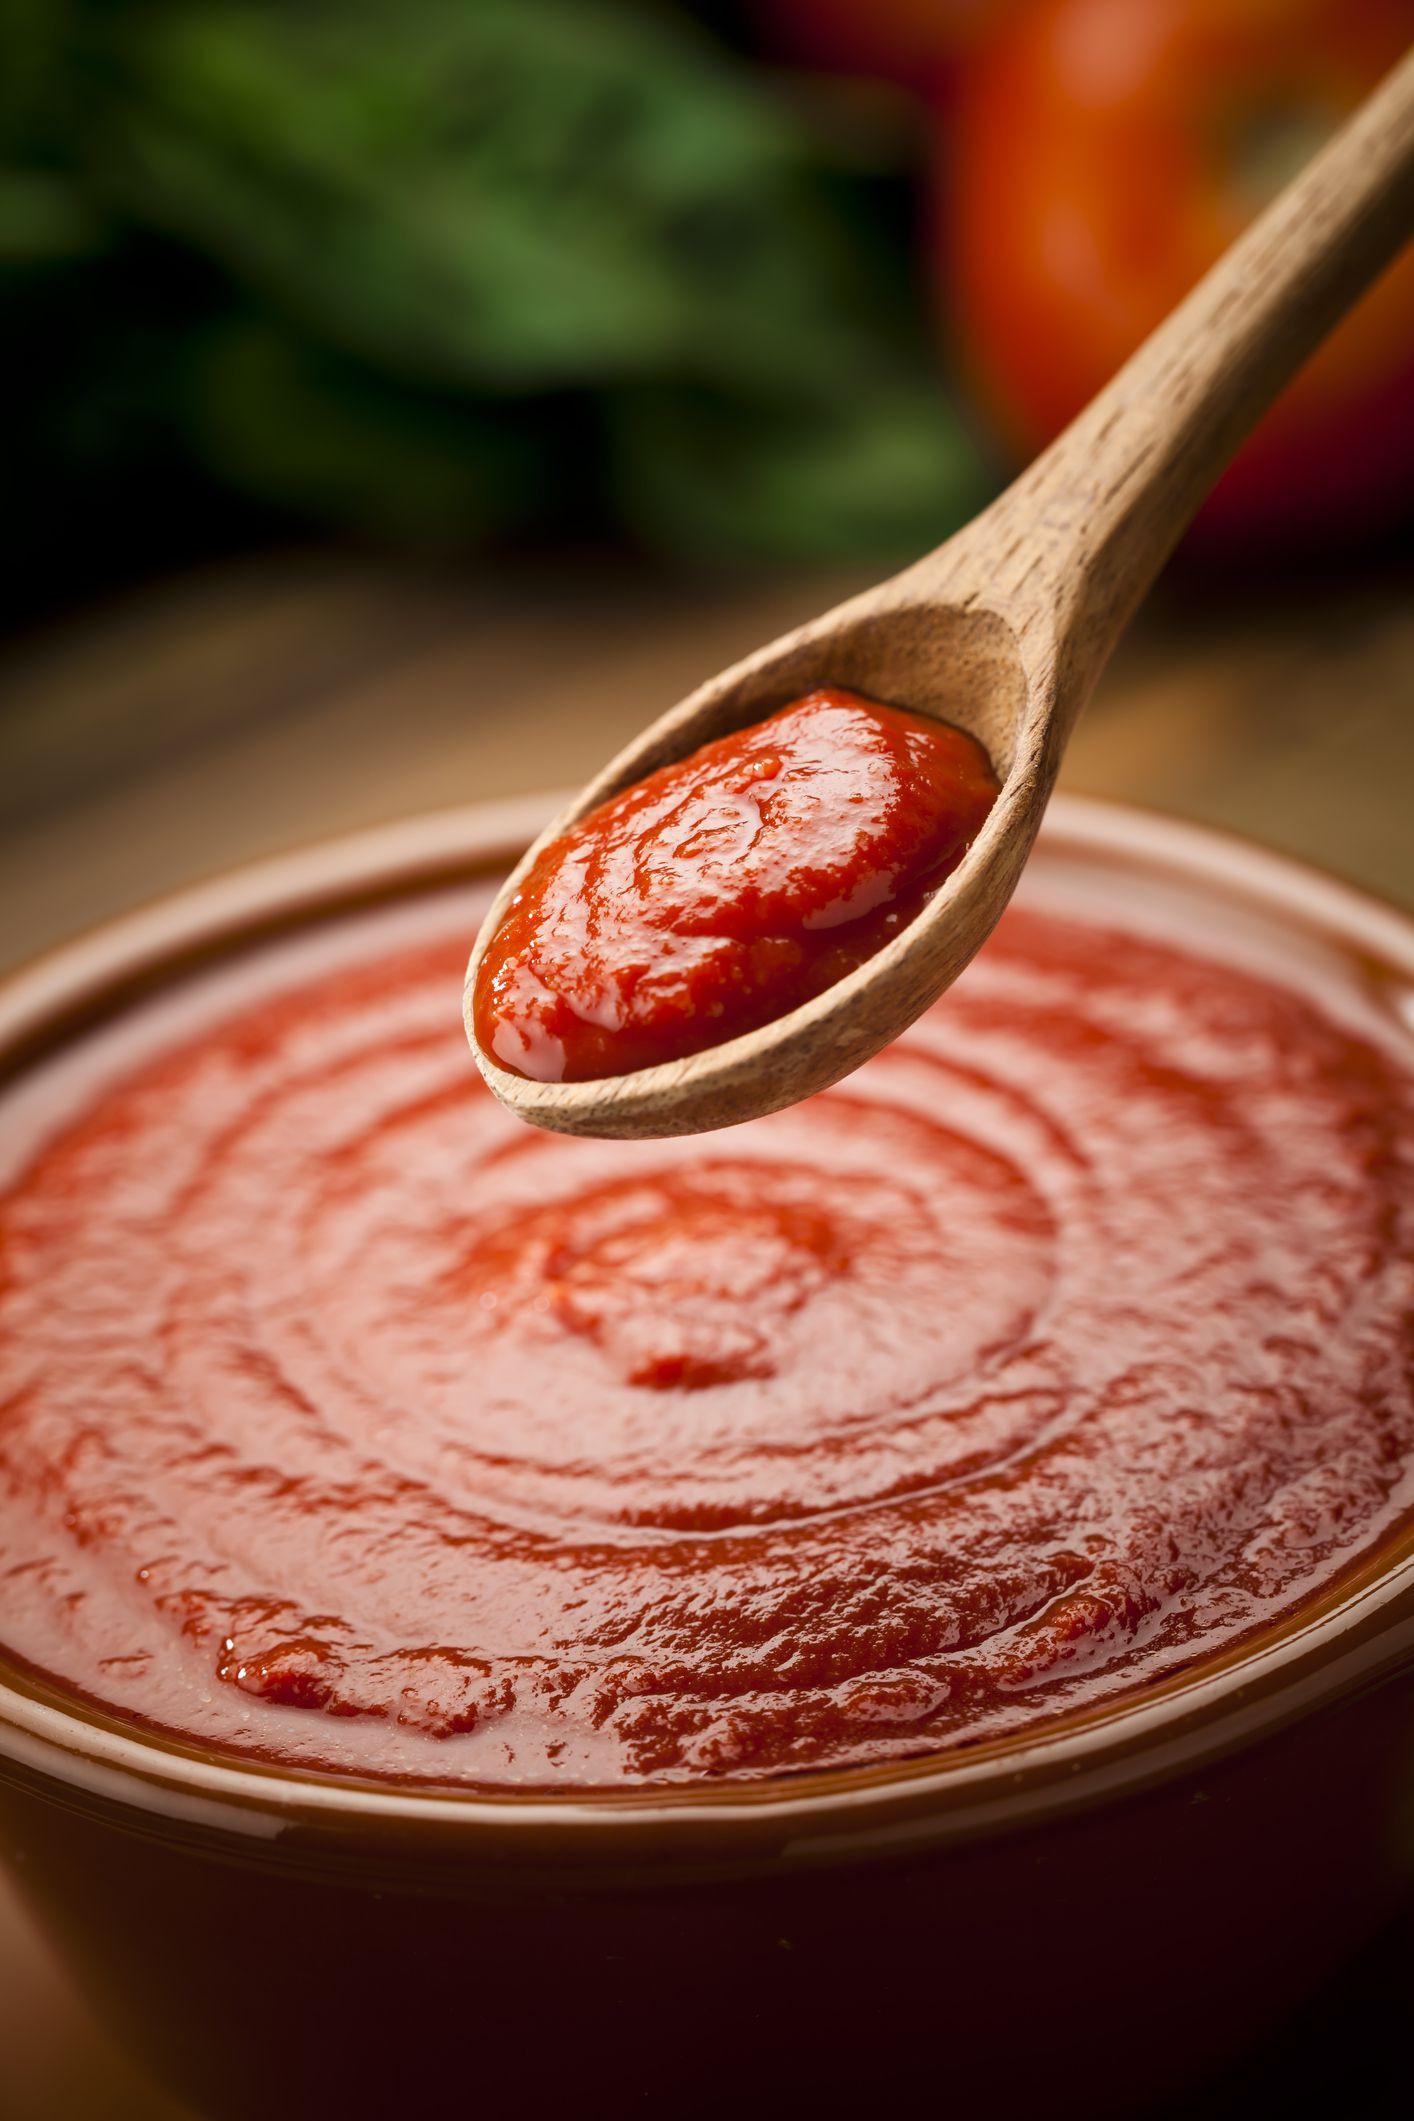 Tomato Sauce From Paste
 How to Make Your Own Tomato Paste